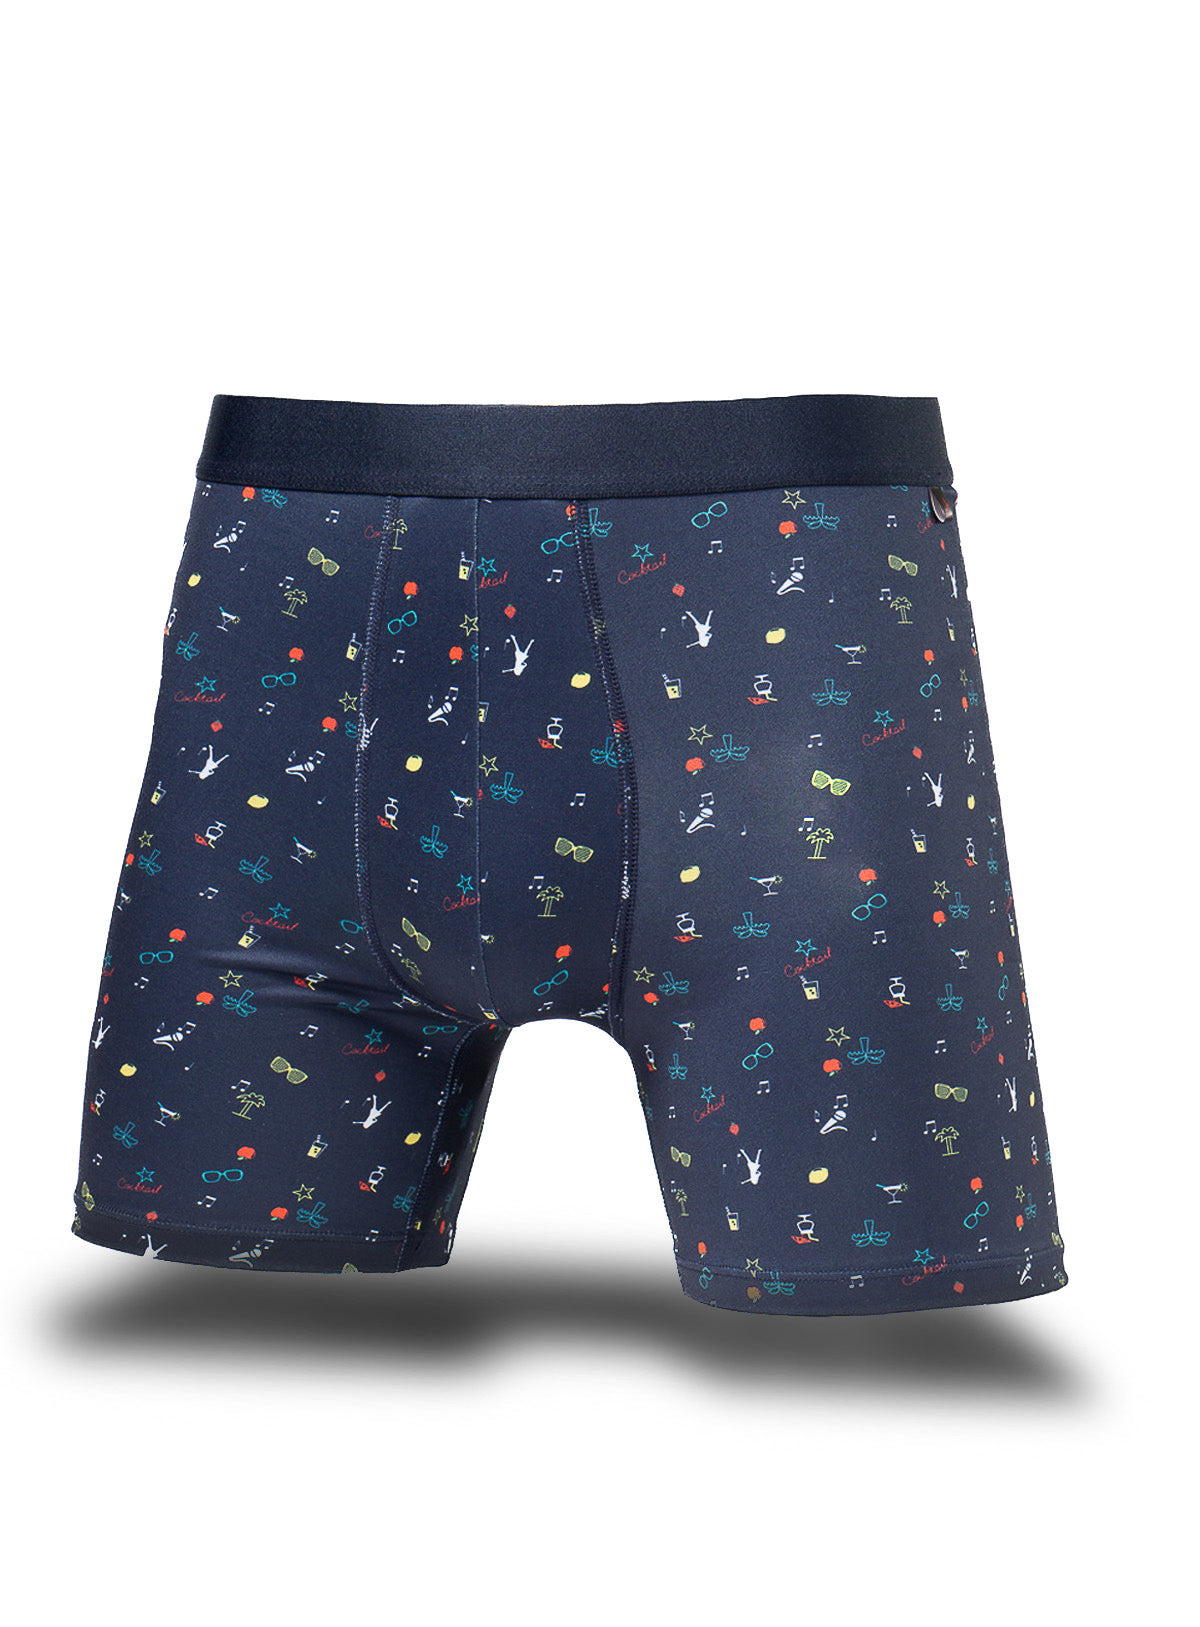 Shop Printed Boxer Shorts with Elastic Waist Online